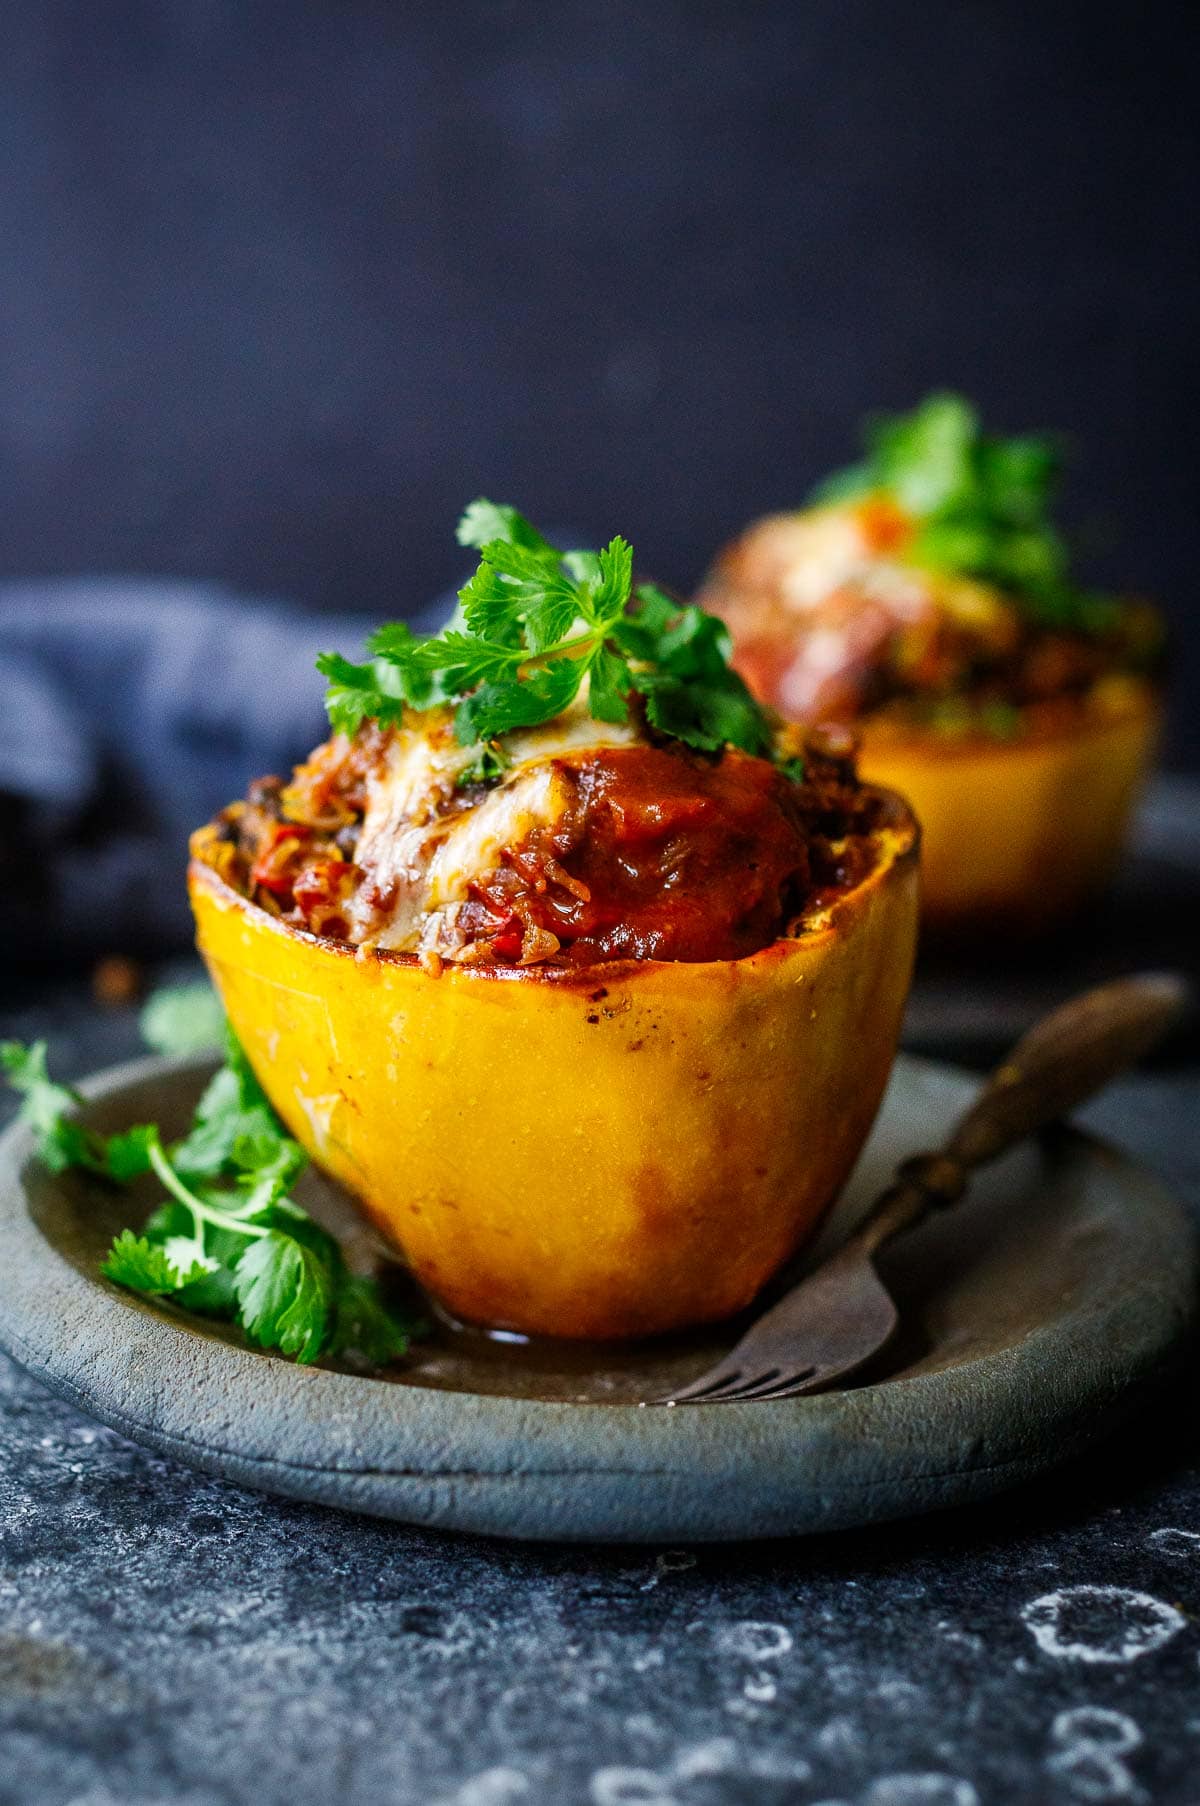 A delicious vegetarian recipe for Stuffed Spaghetti Squash with a Mexican twist. Black beans, corn, bell pepper, onion and cilantro, enchilada sauce and melty cheese give this spaghetti squash recipe the best flavor! Vegan-adaptable!